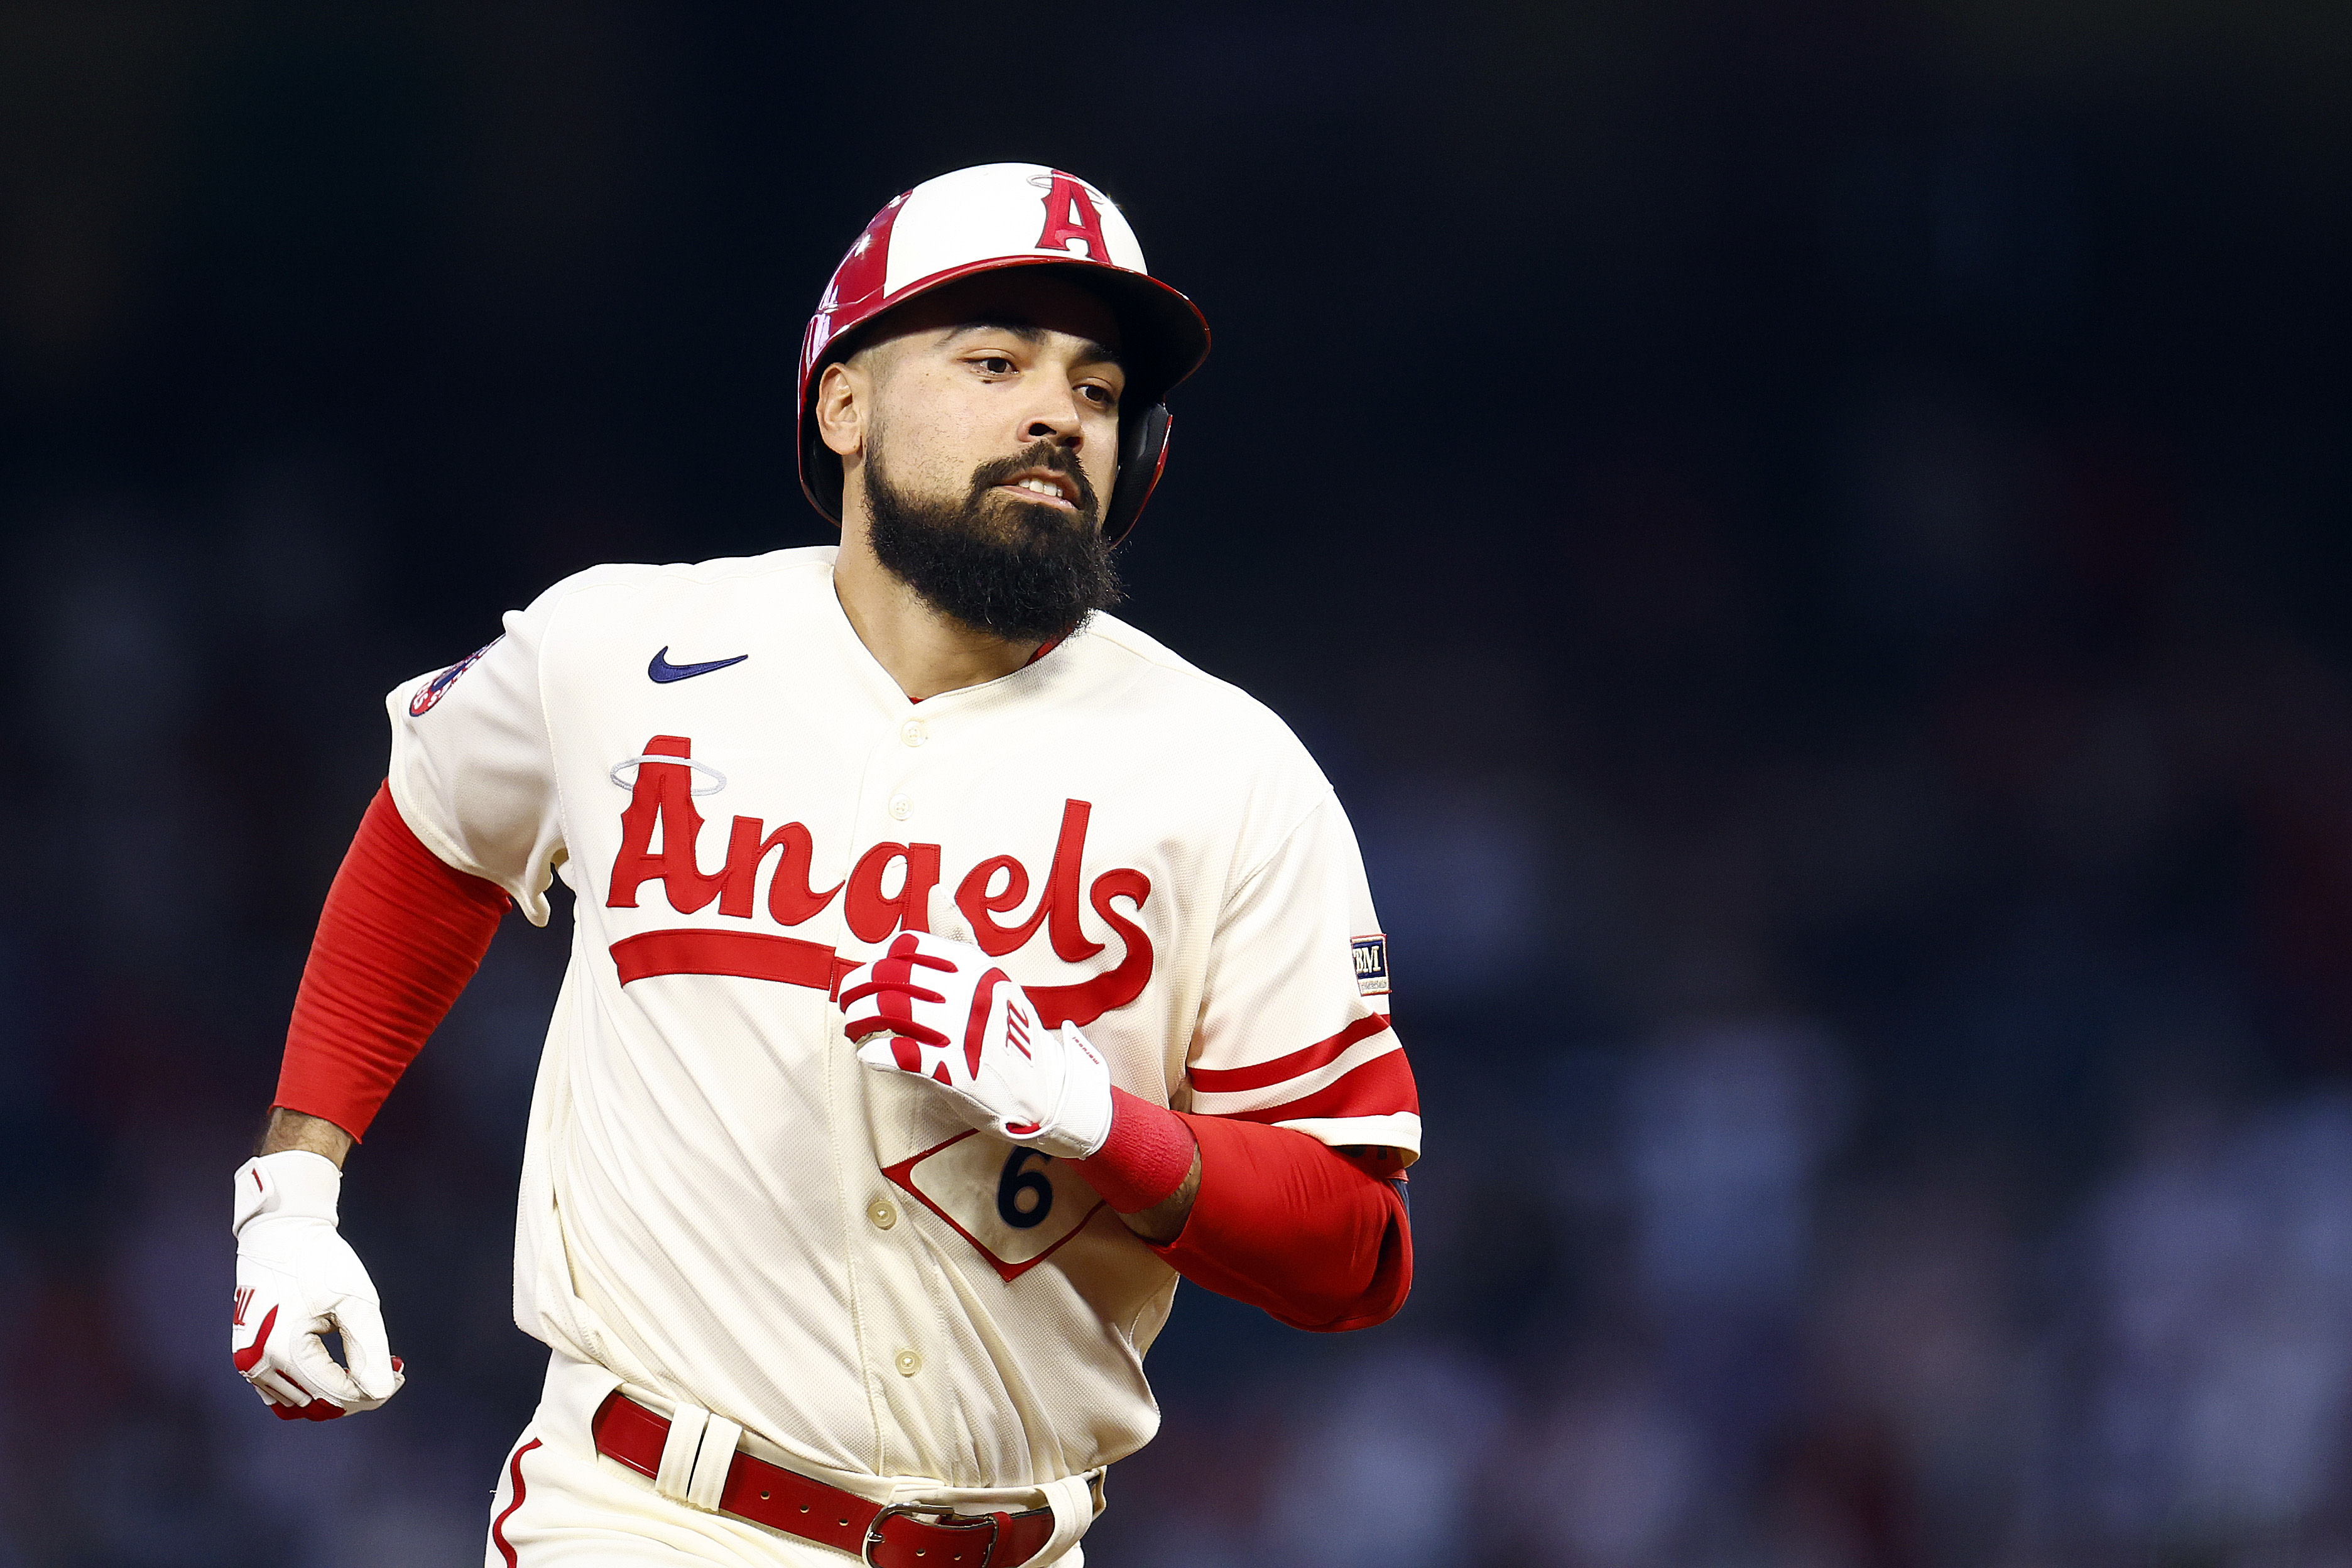 MLB investigating Anthony Rendon for fan altercation - Lone Star Ball